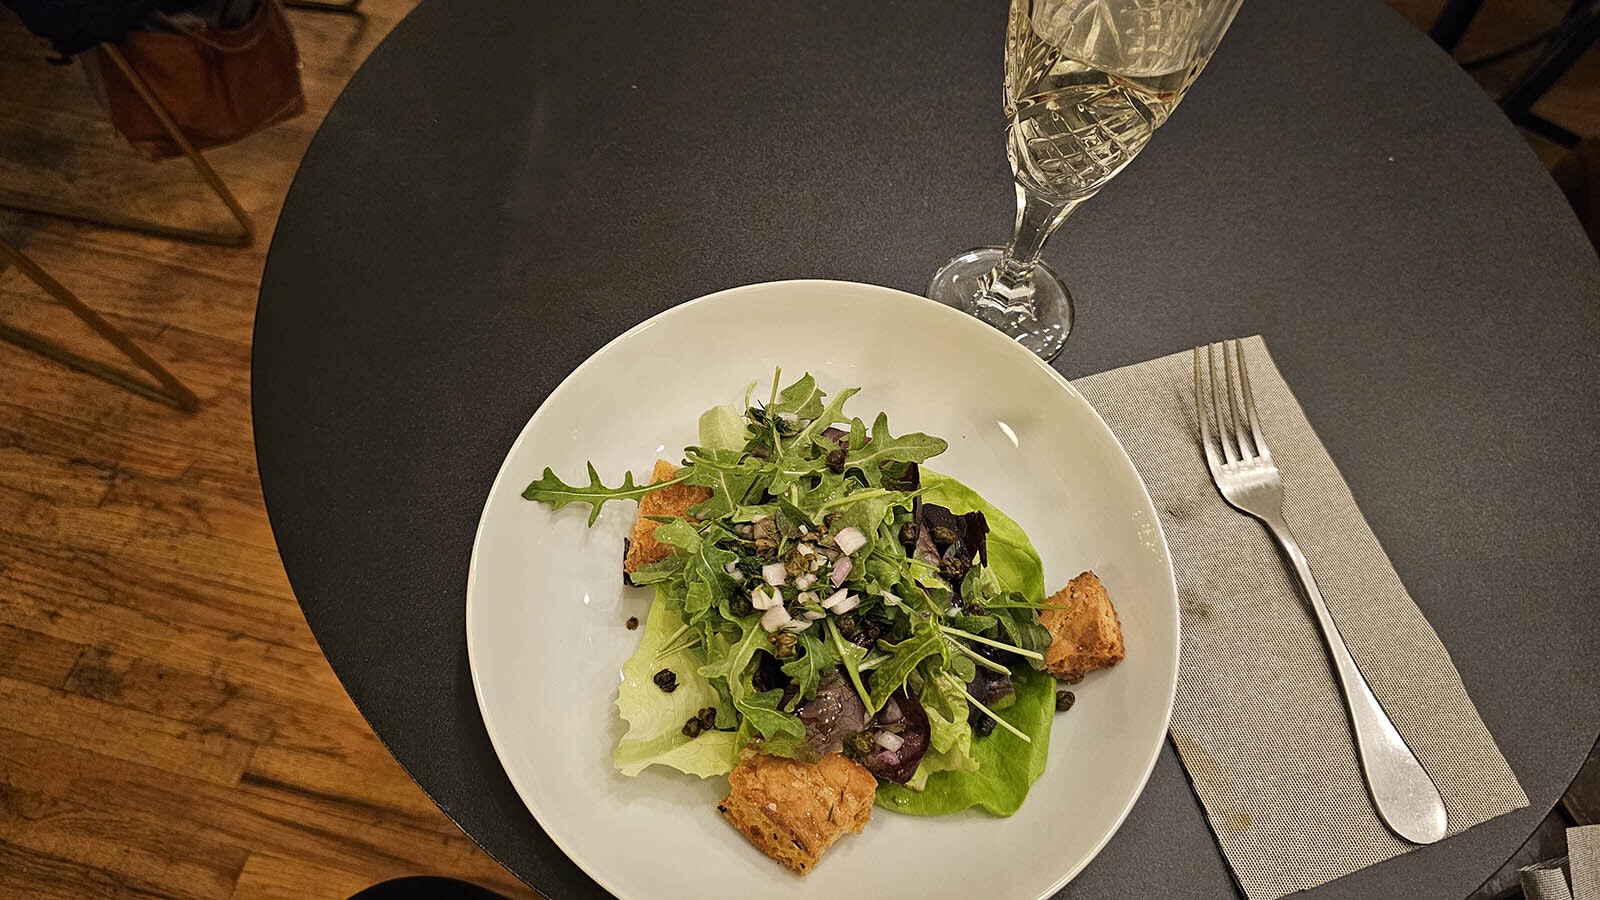 A perfect salad with bitter greens, tossed with foccacia croutons and a tart mignonette sauce. Served with a glass of Prosecco.